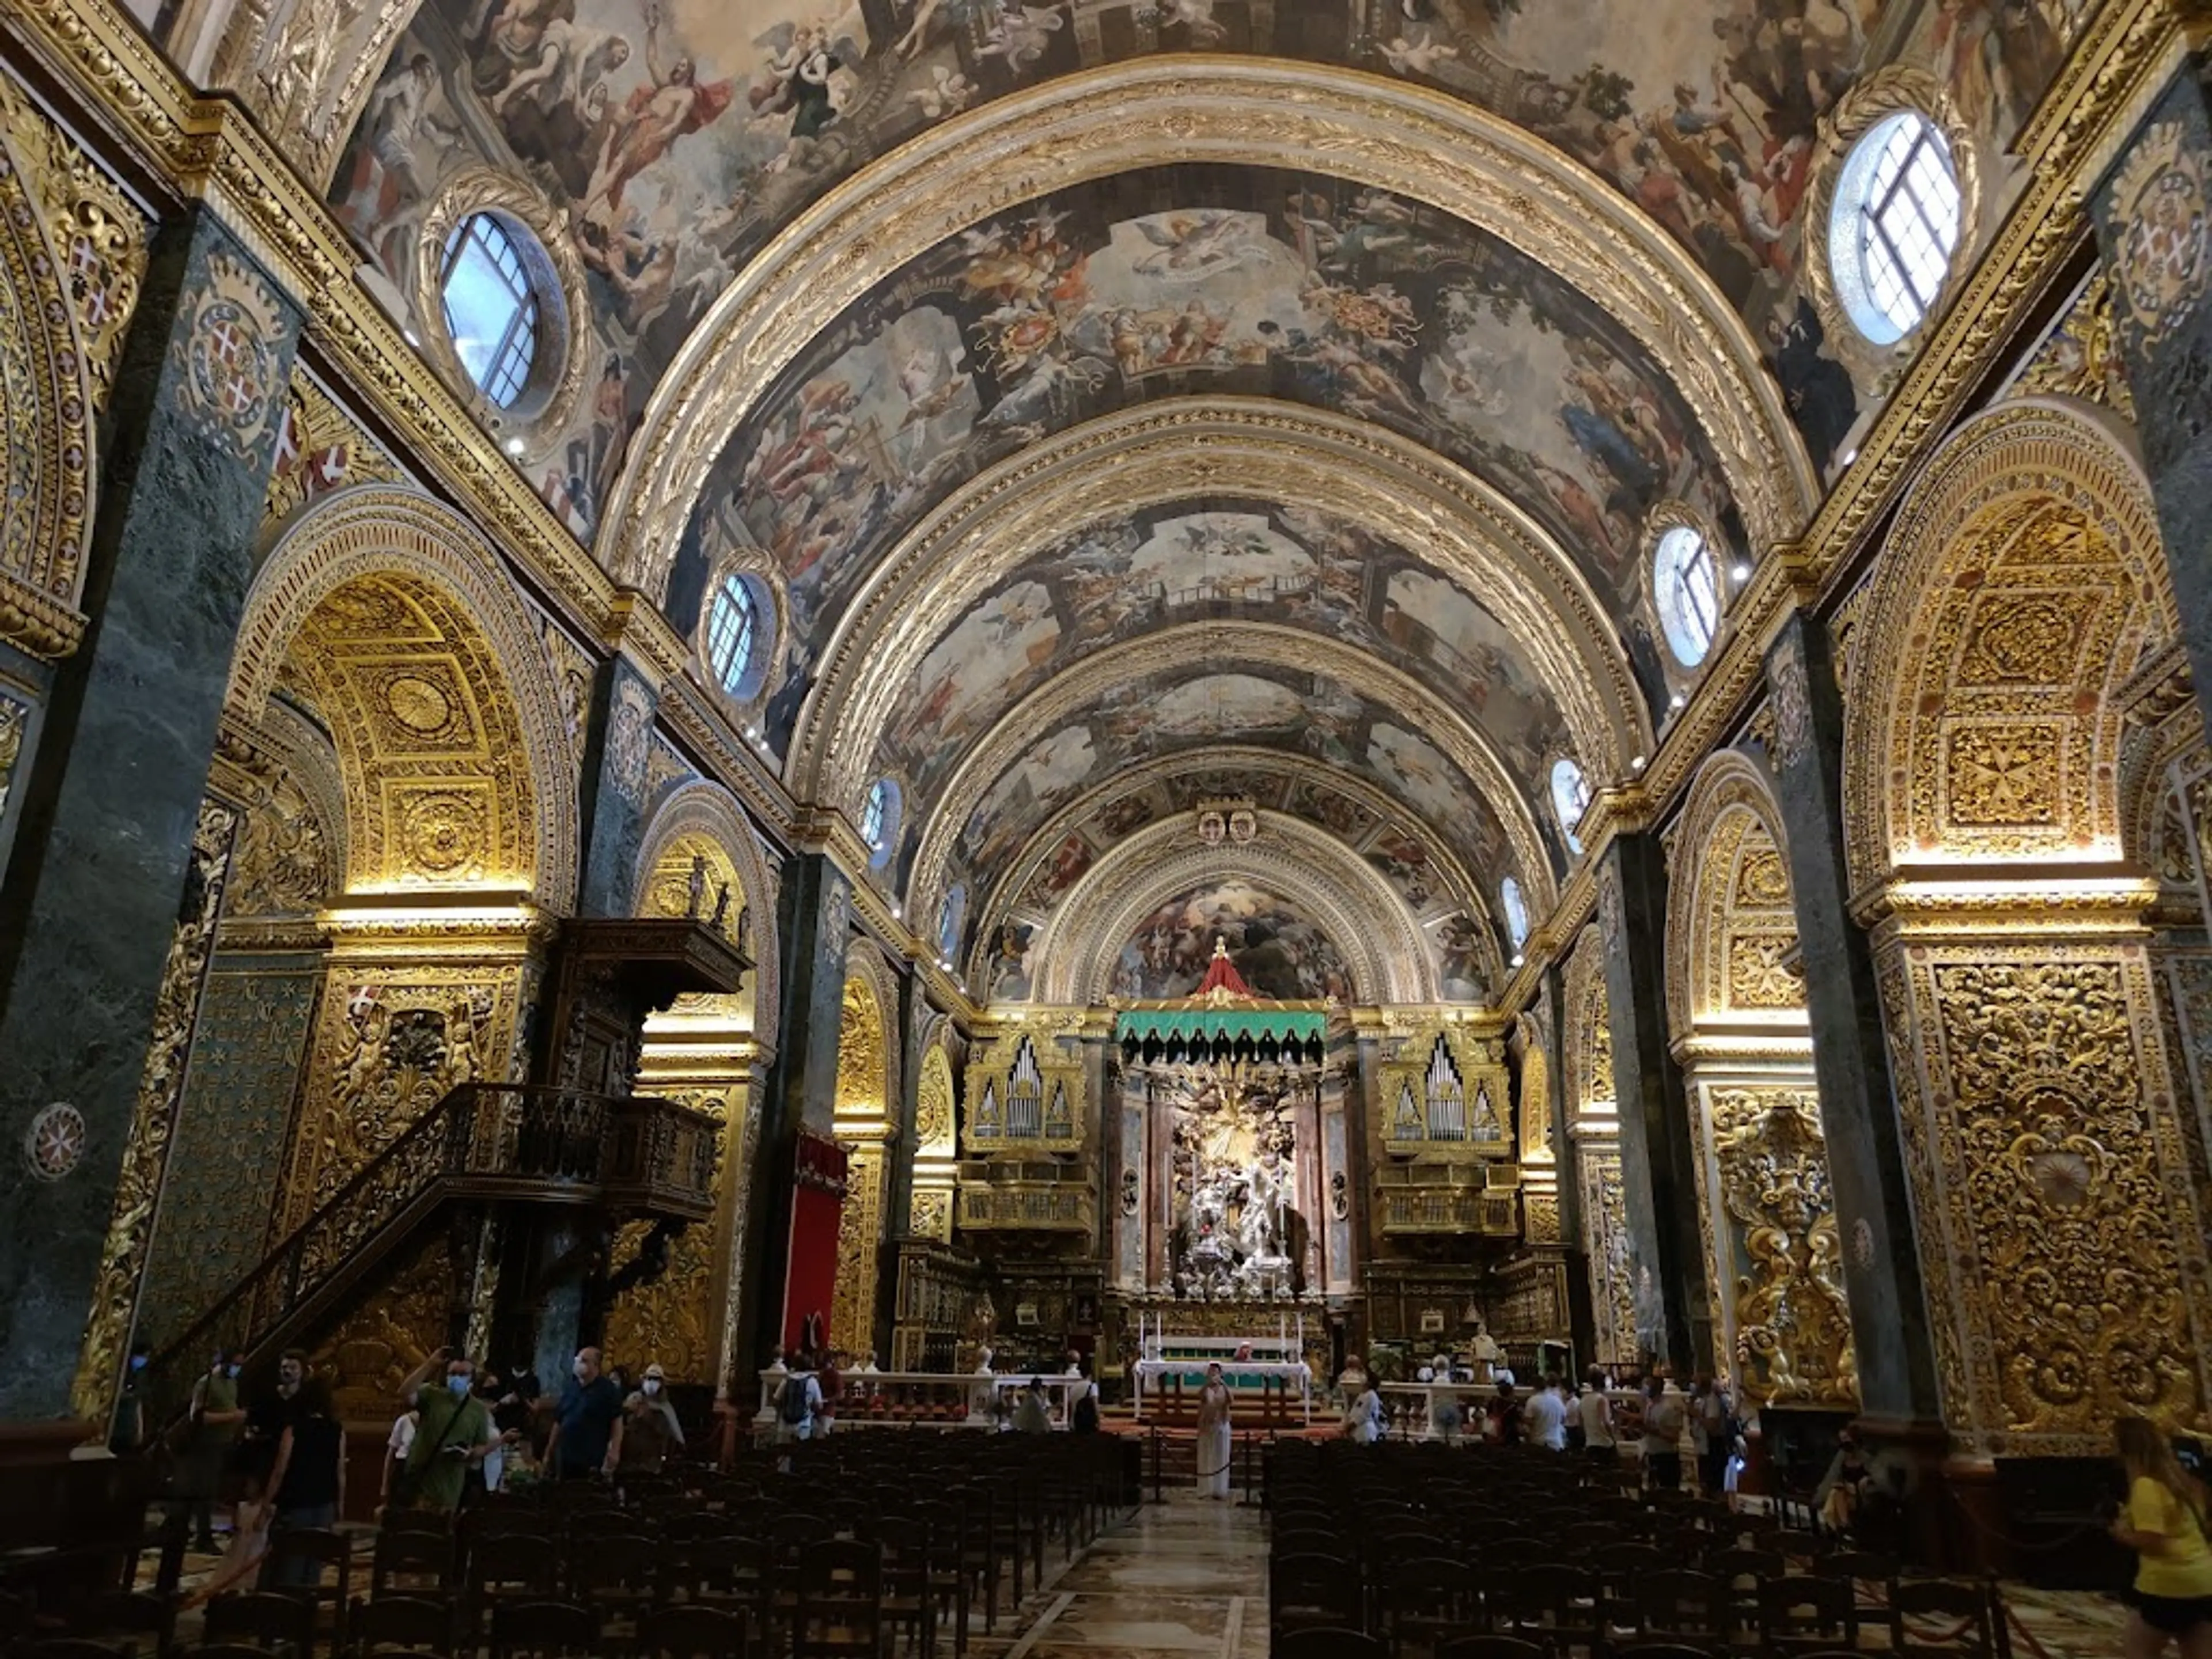 St. John's Co-Cathedral